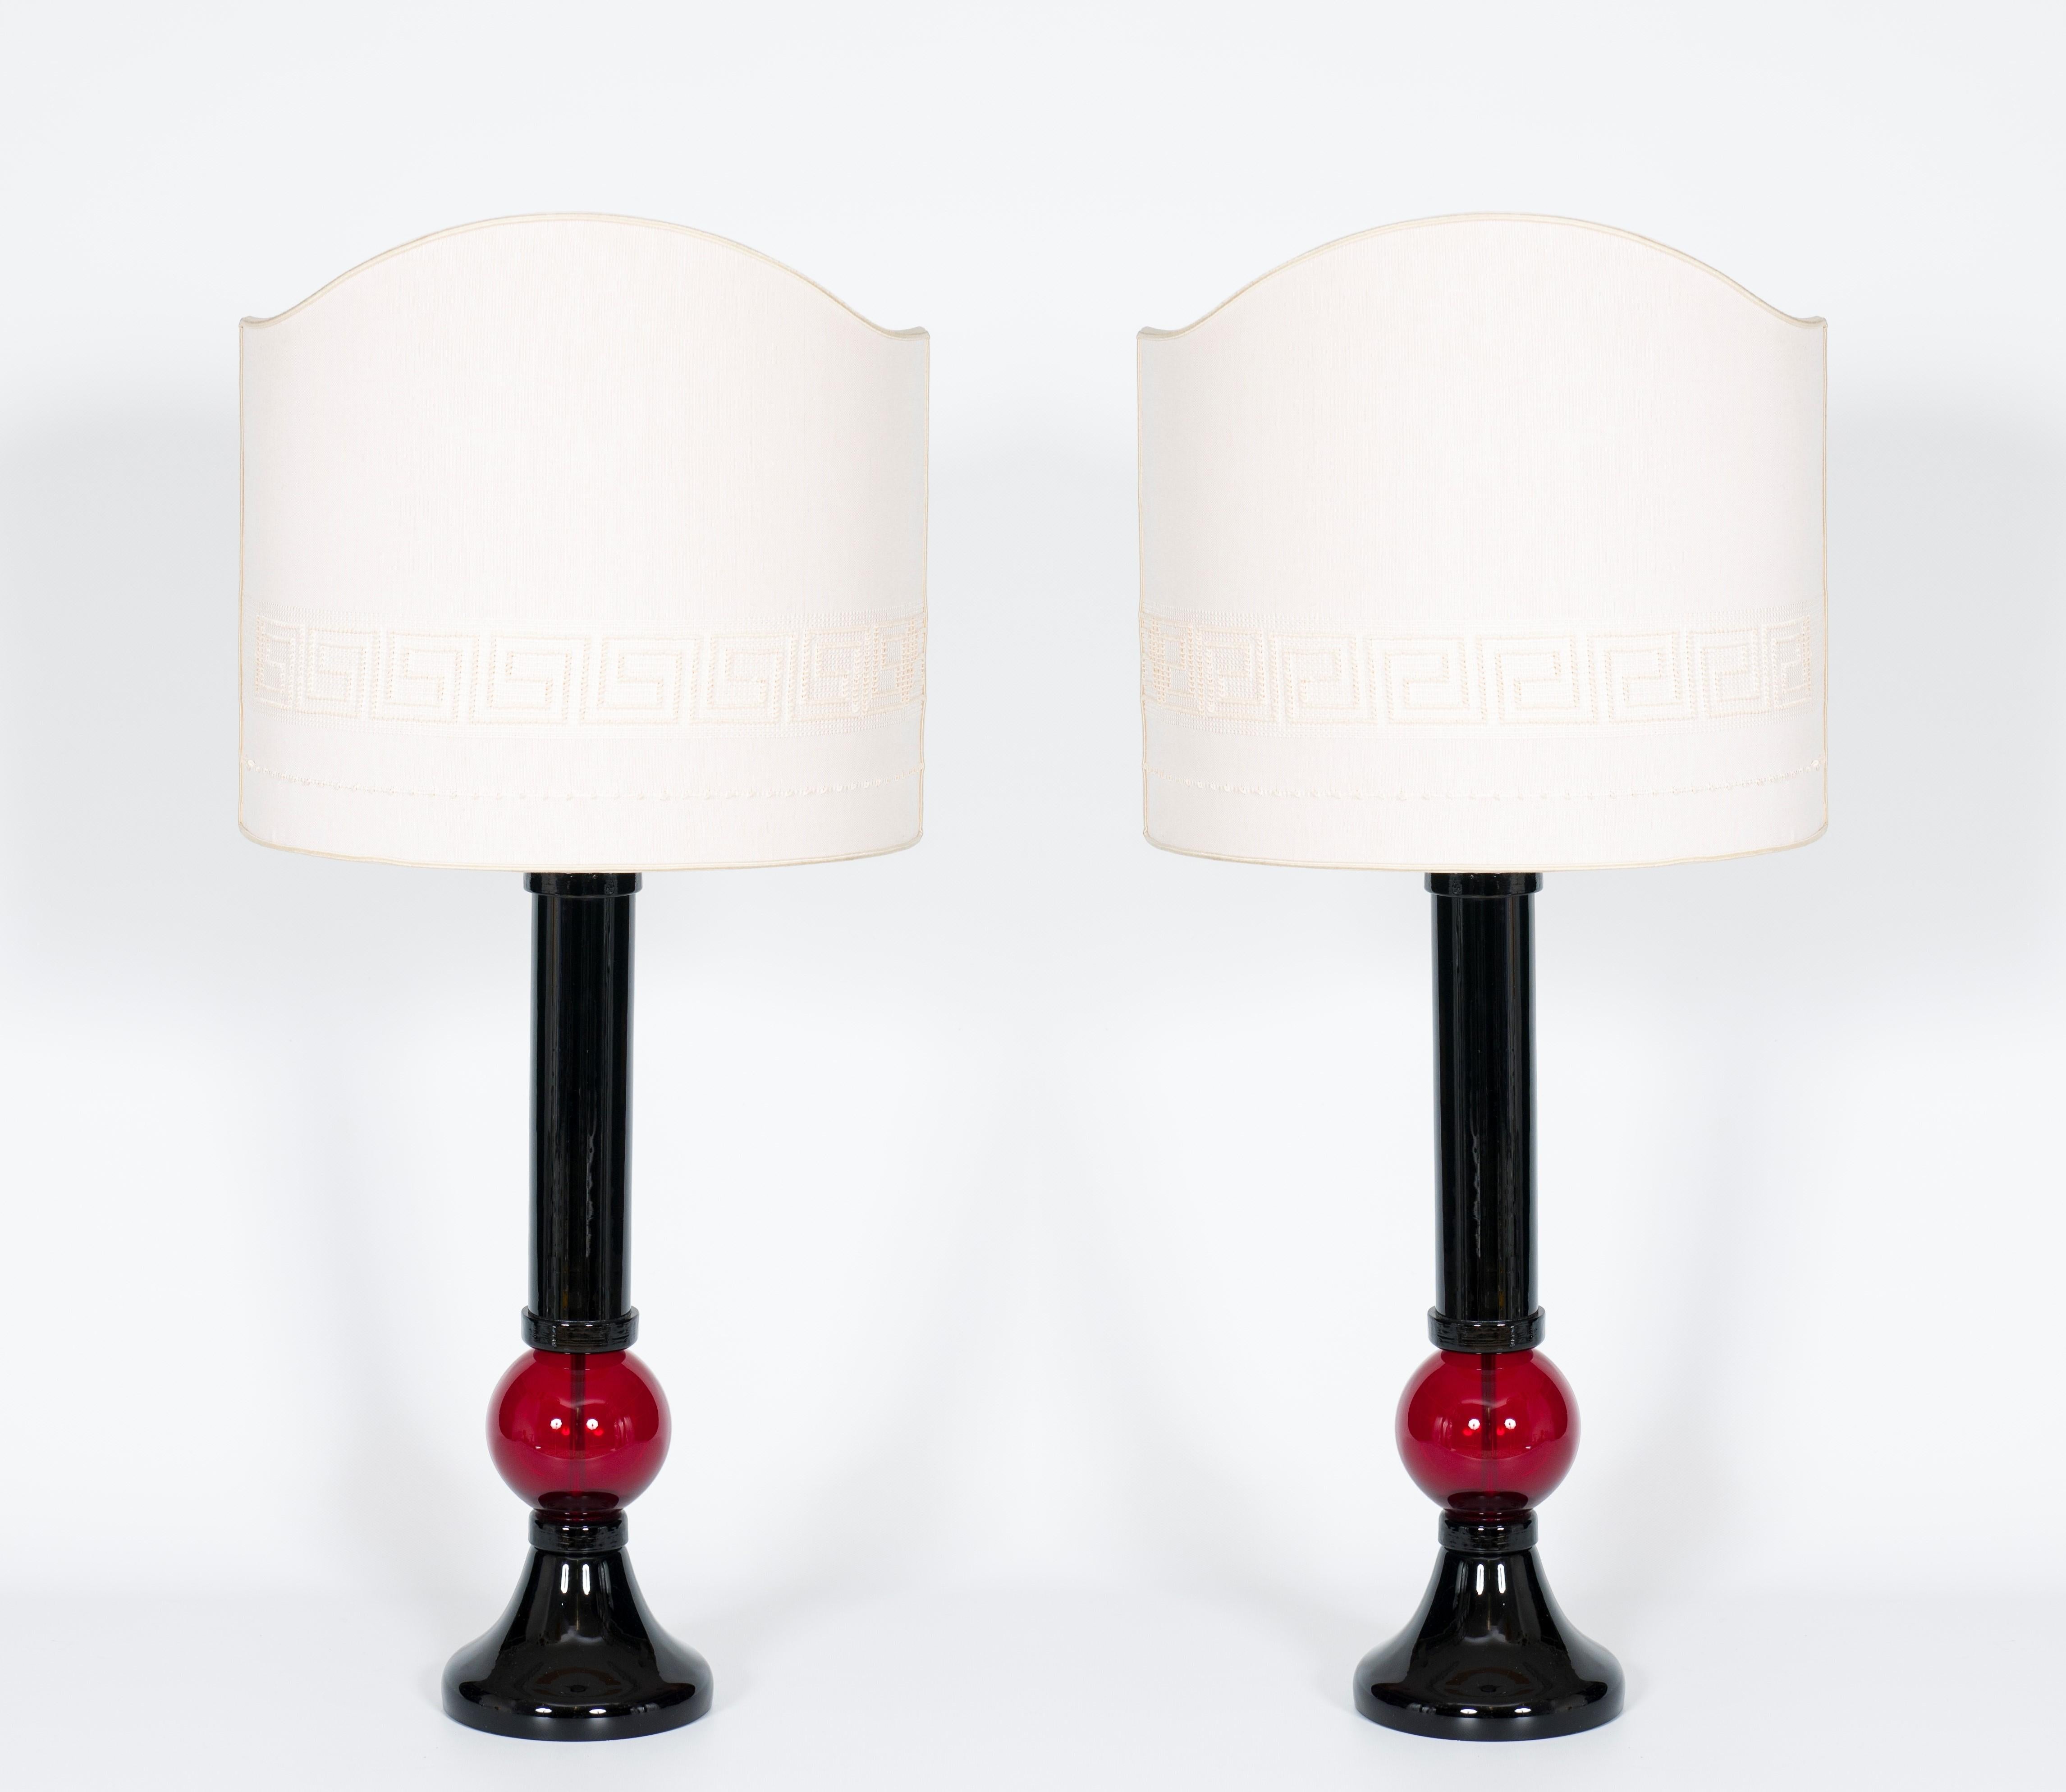 Contemporary pair of Black and Red Table Lamp in Blown Murano Glass, 21st Century.
This is an exclusive pair of Venetian table lamps, entirely made of blown Murano glass. They stand out for their perfection of details, their richness of colors, and